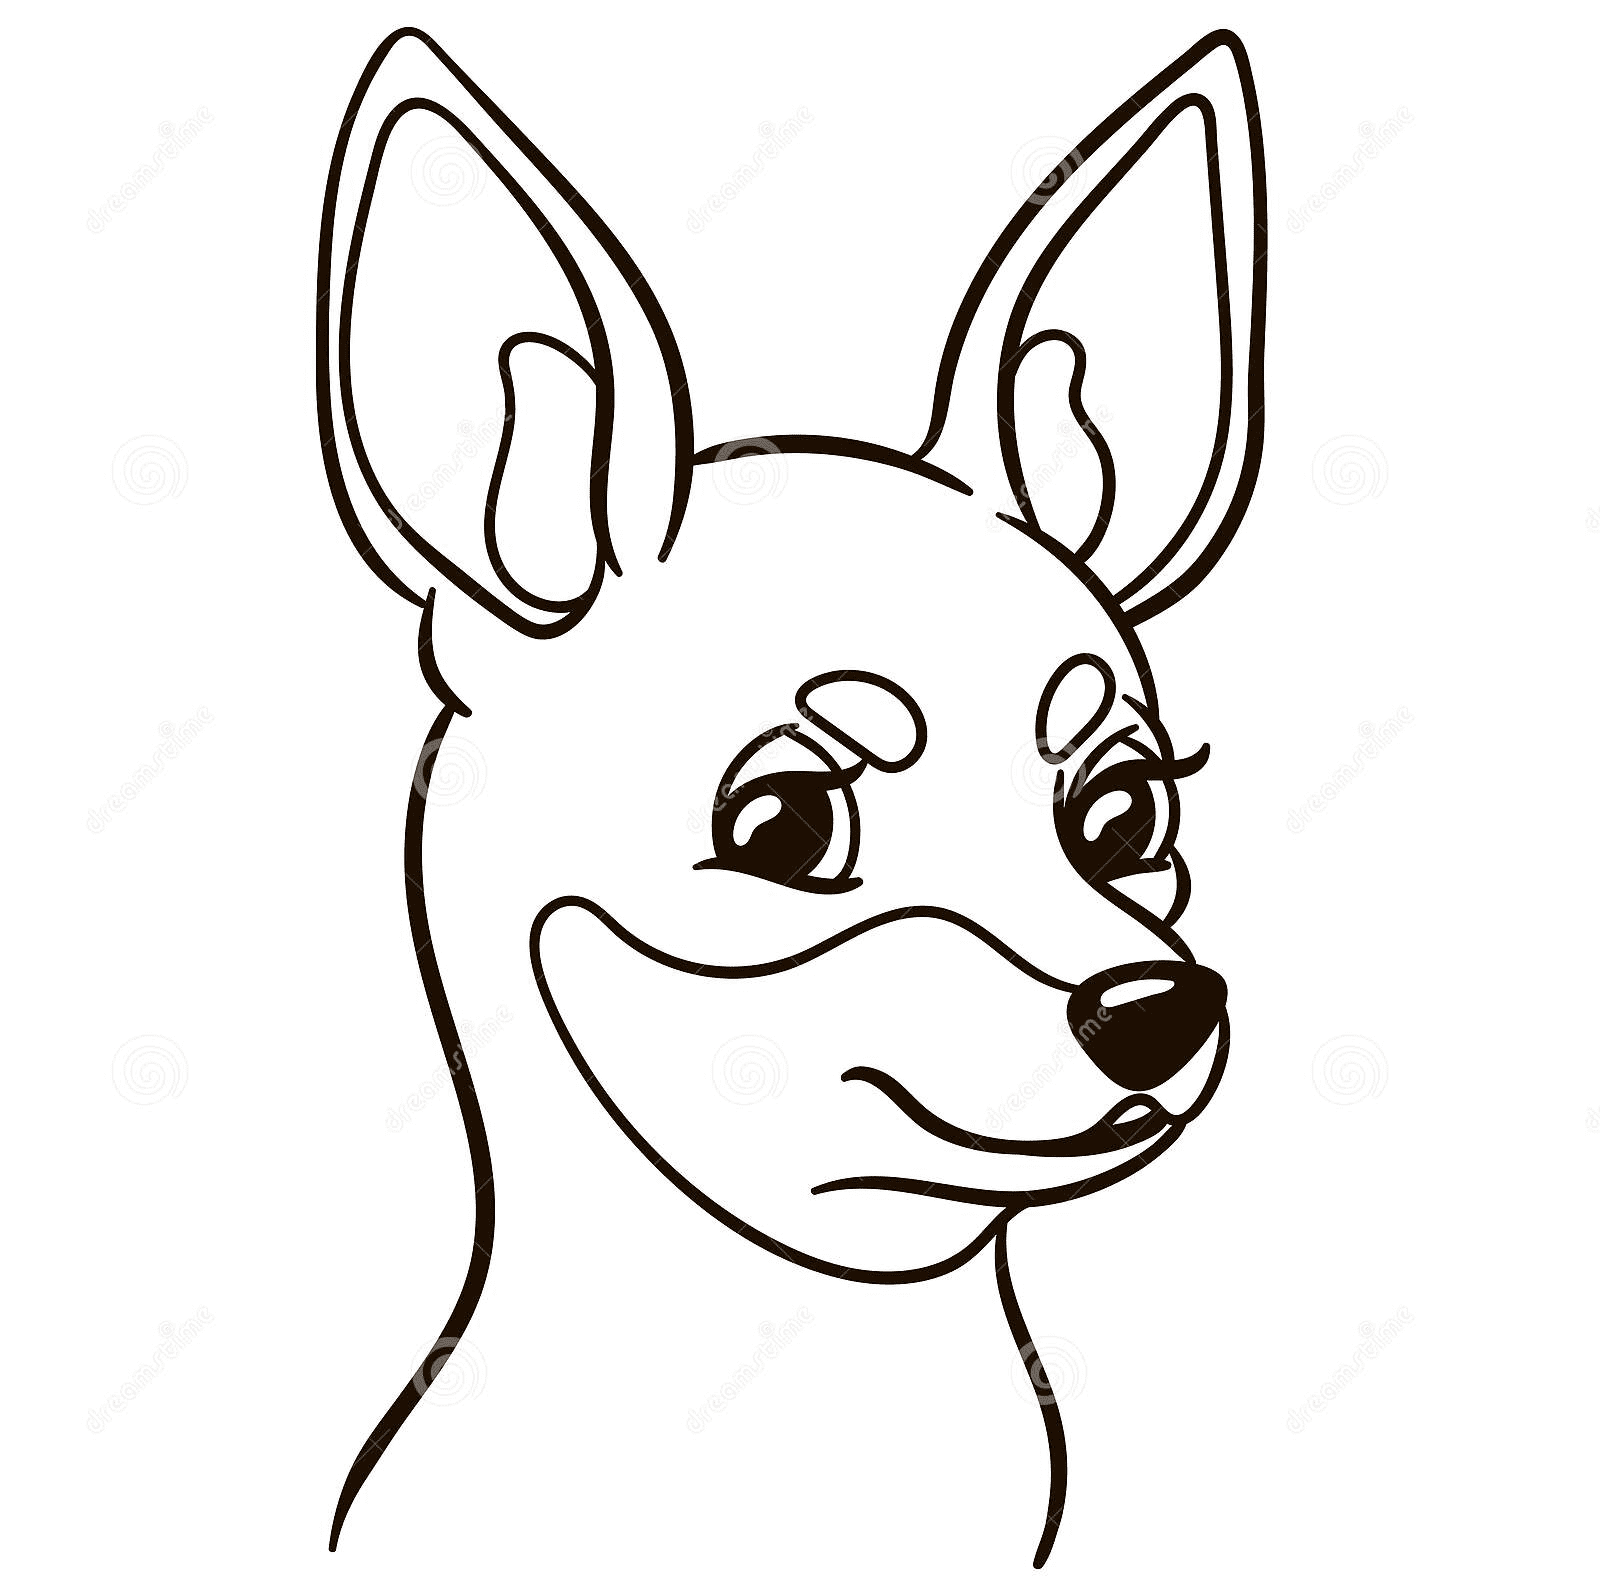 Chihuahua Image For Kids Coloring Page